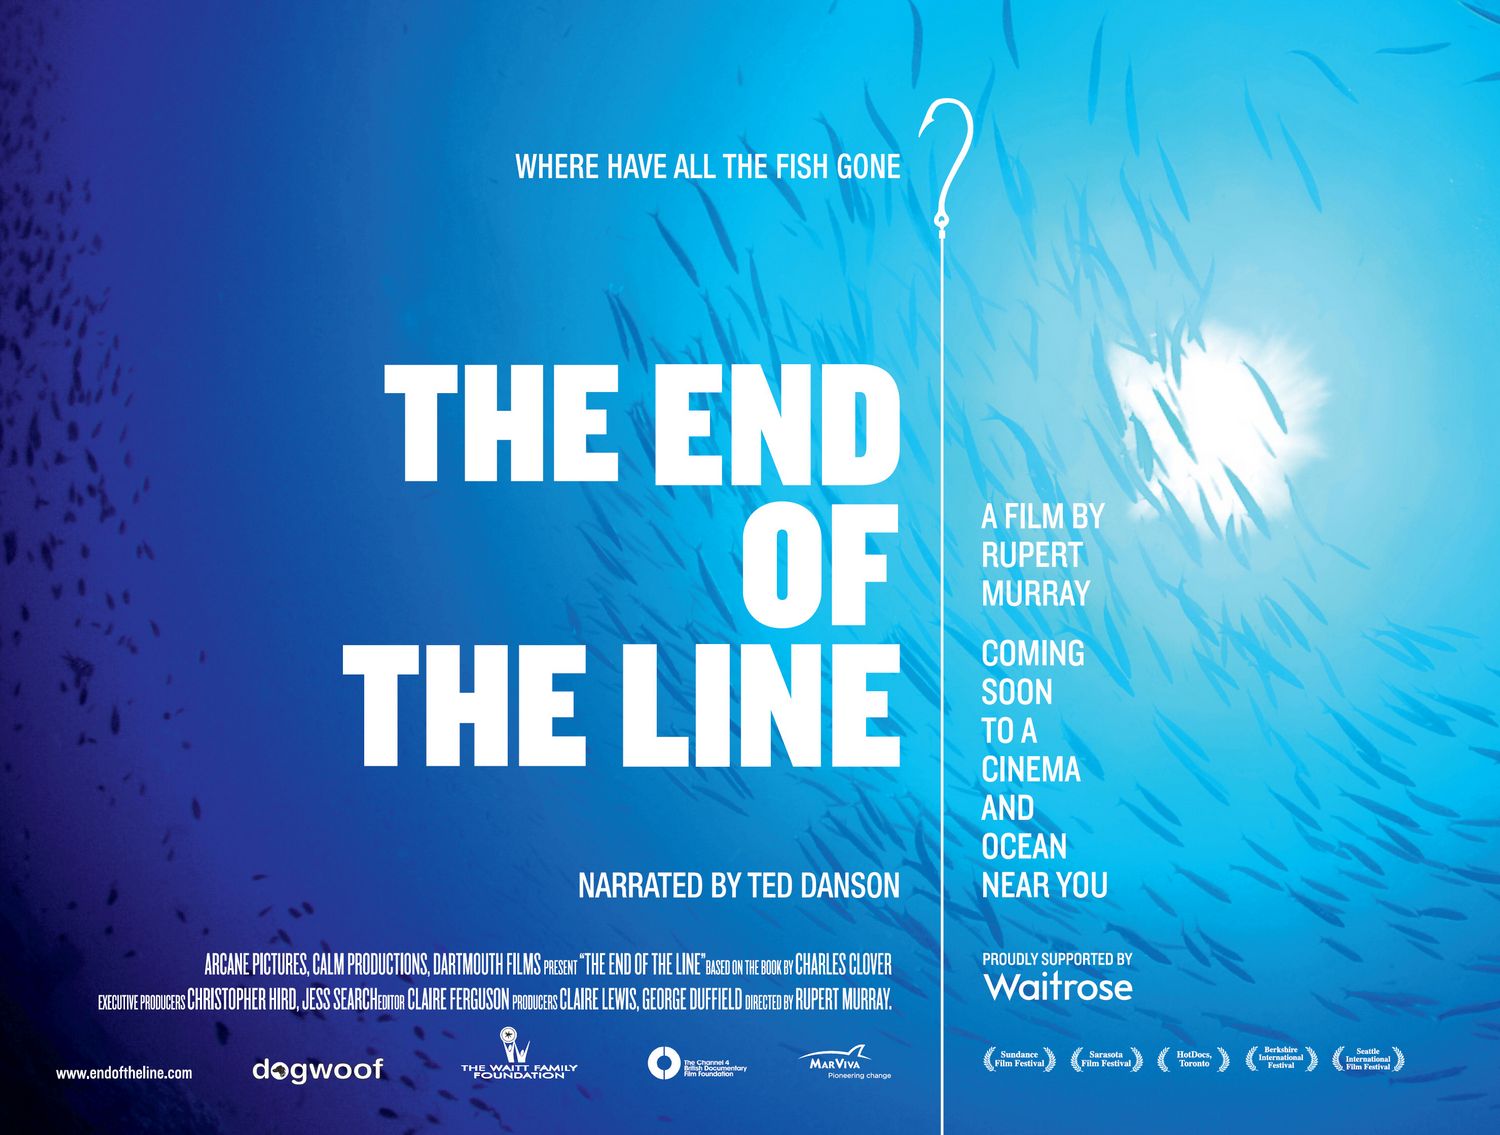 The End of the line